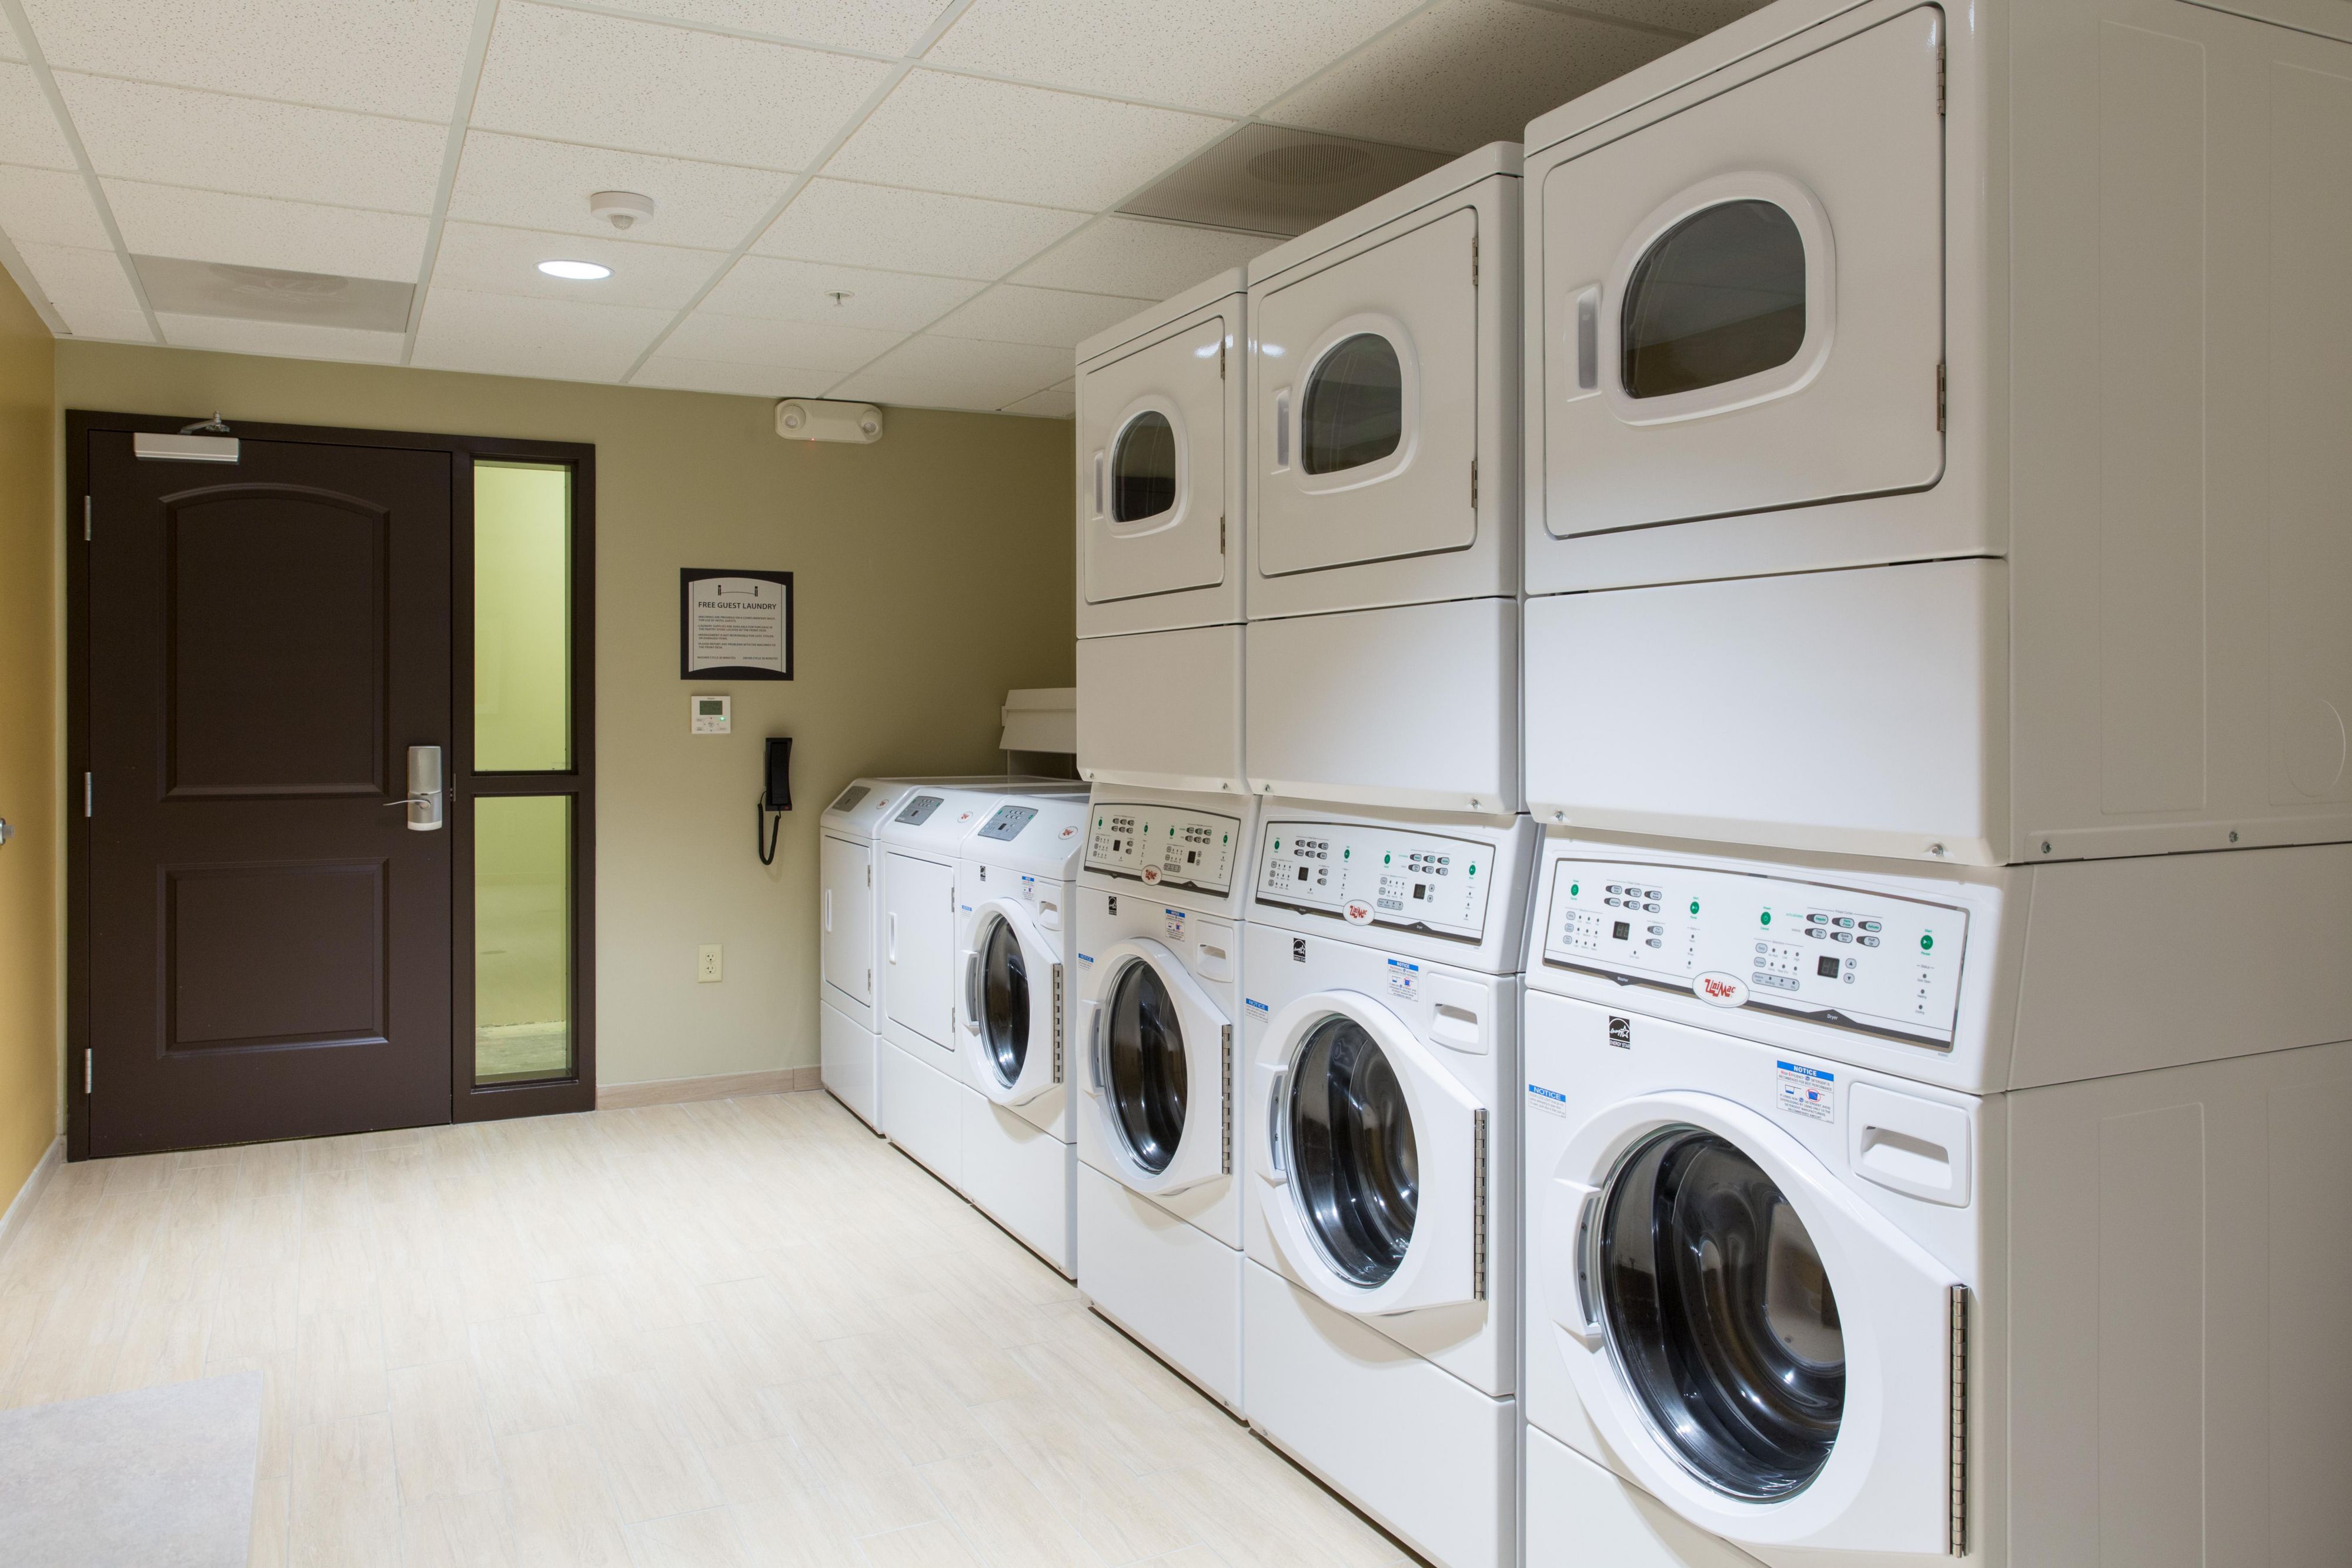 This special amenity you will not find anywhere else. We offer four washers and five dryers to our guests complimentary. Located right off the fitness center, you can work out while you wait, or just relax and watch TV. Happy laundry day!!